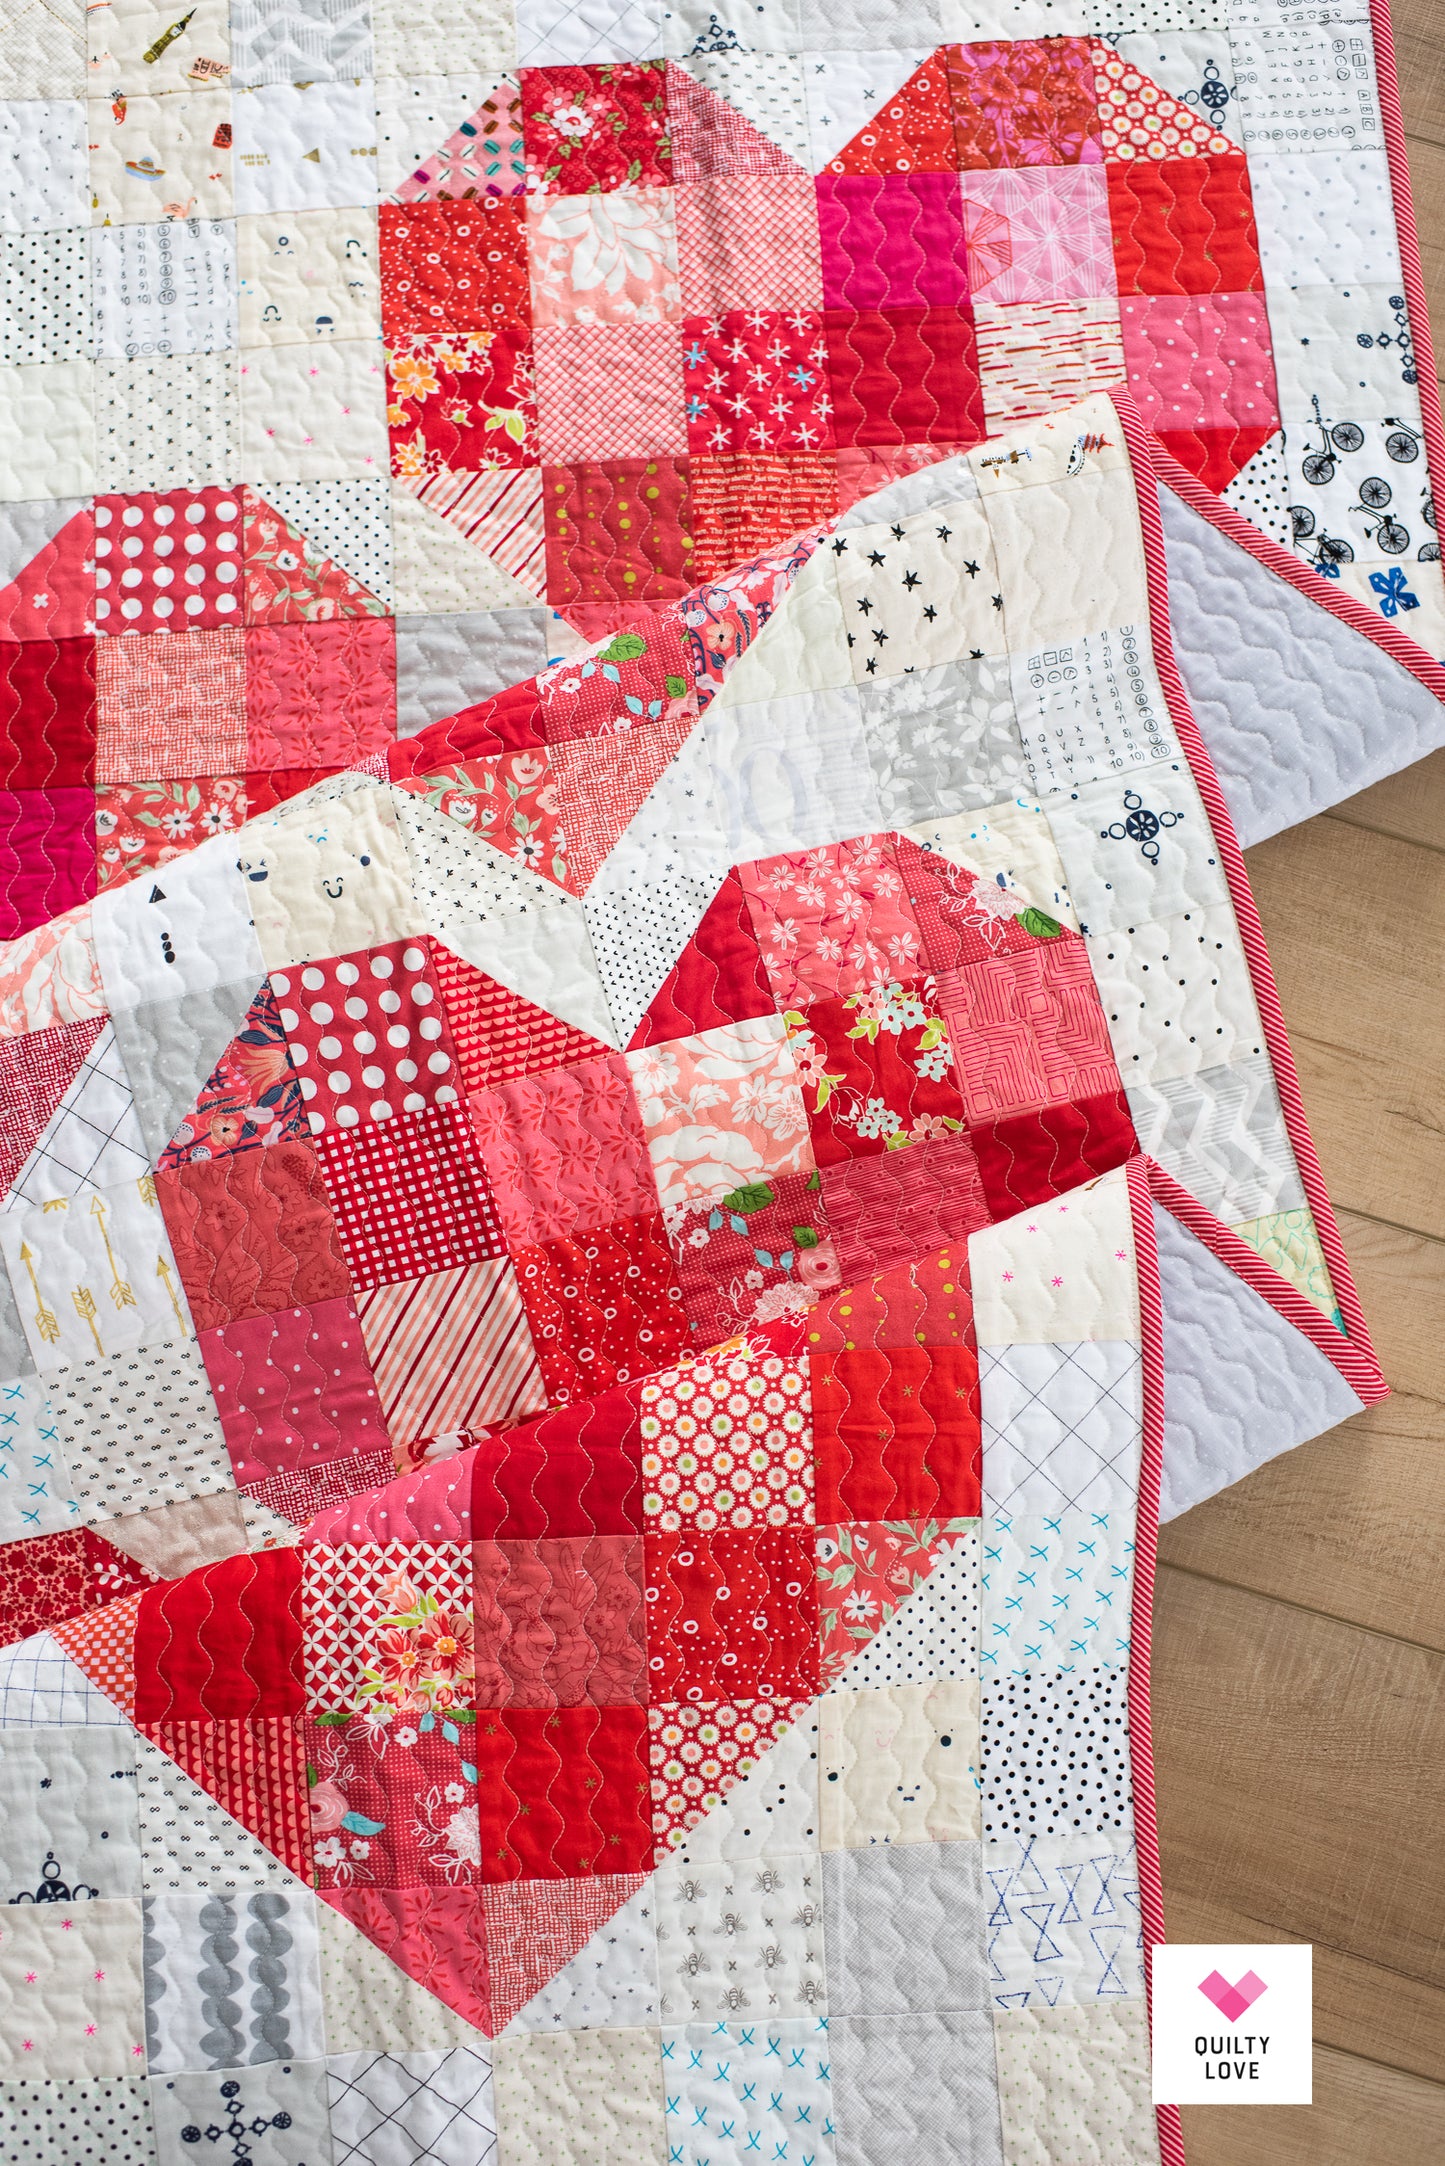 Scrappy Hearts Quilt - The scrappy scrappy one